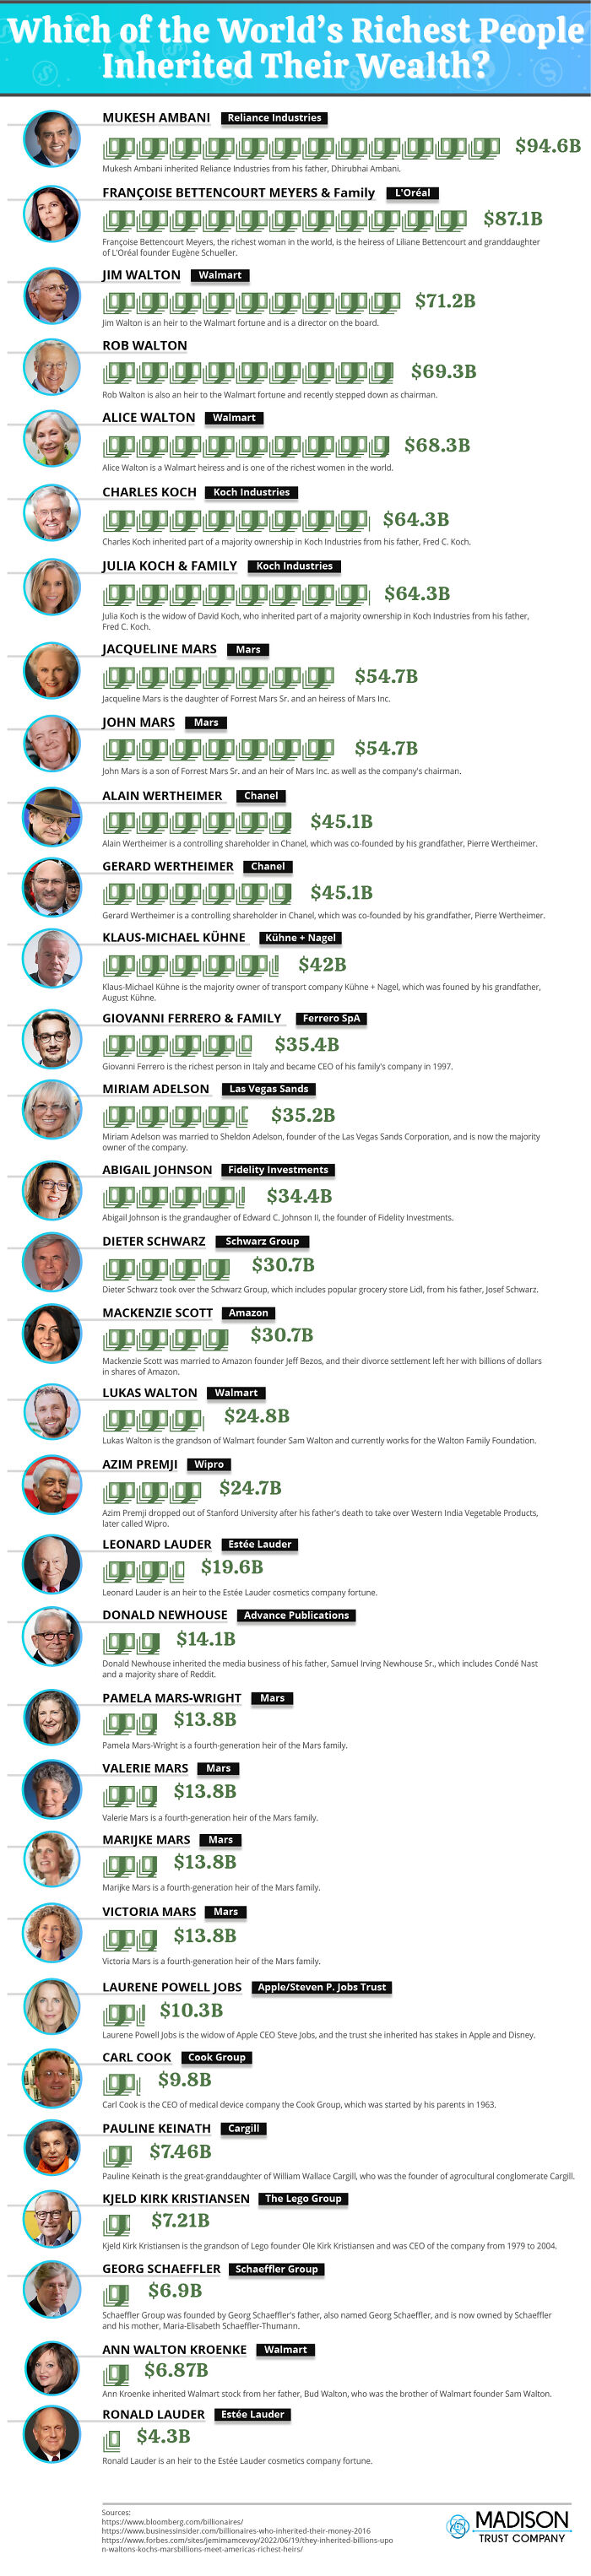 Which Of The World's Richest People Inherited Their Wealth?